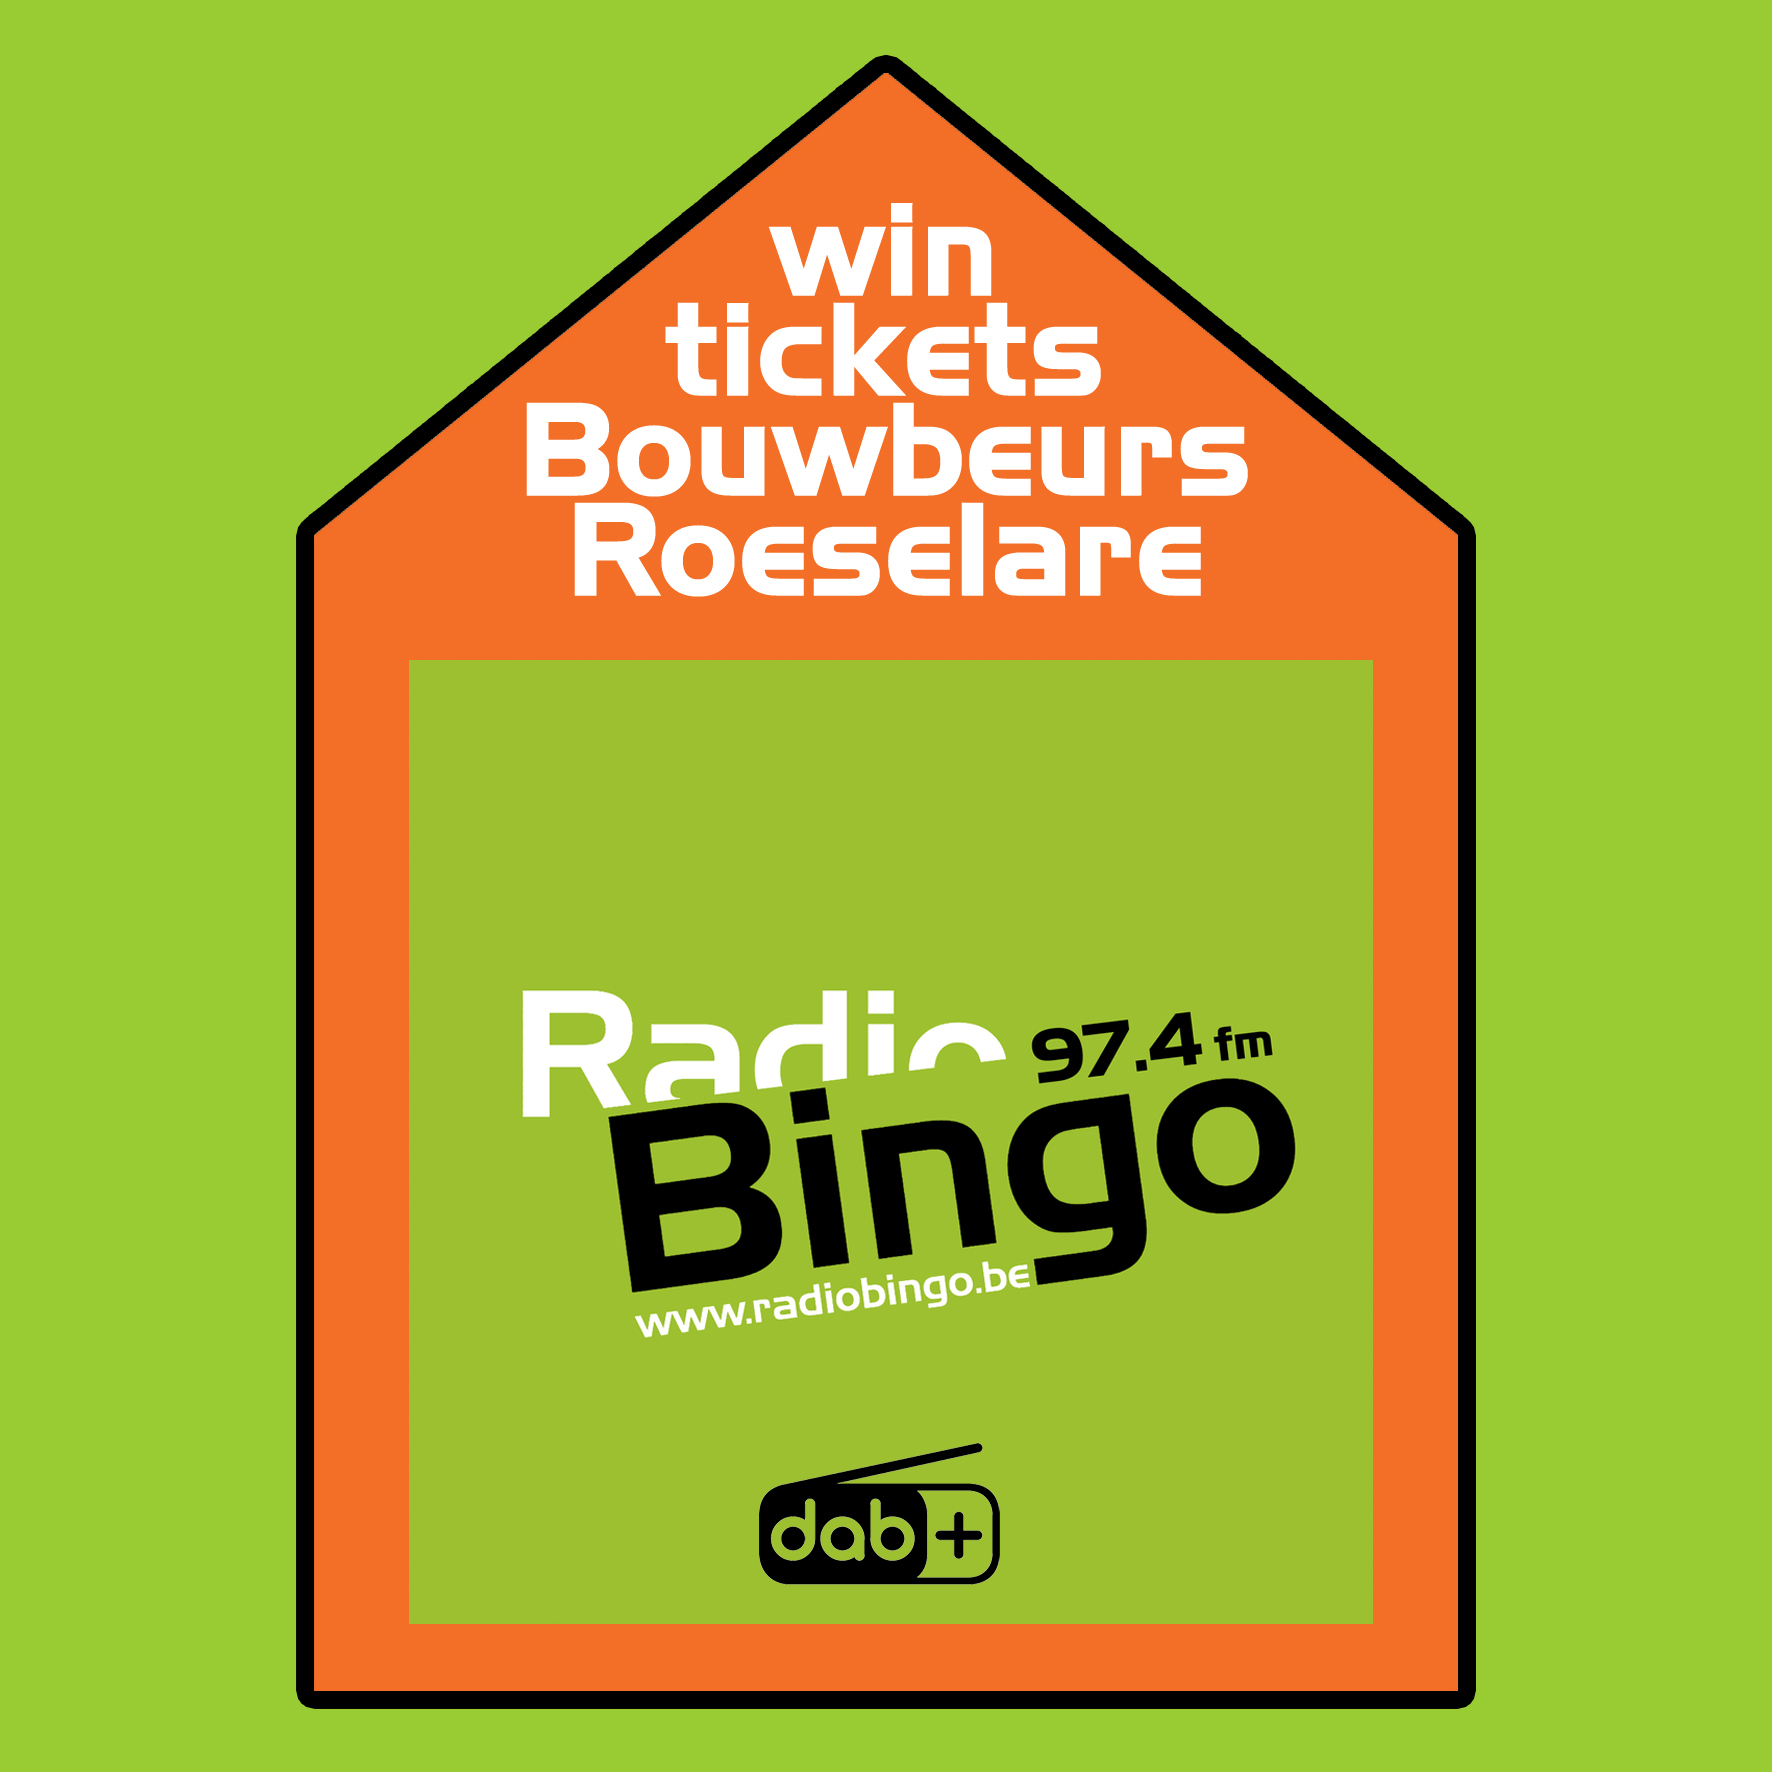 Win tickets Bouwbeurs Roeselare